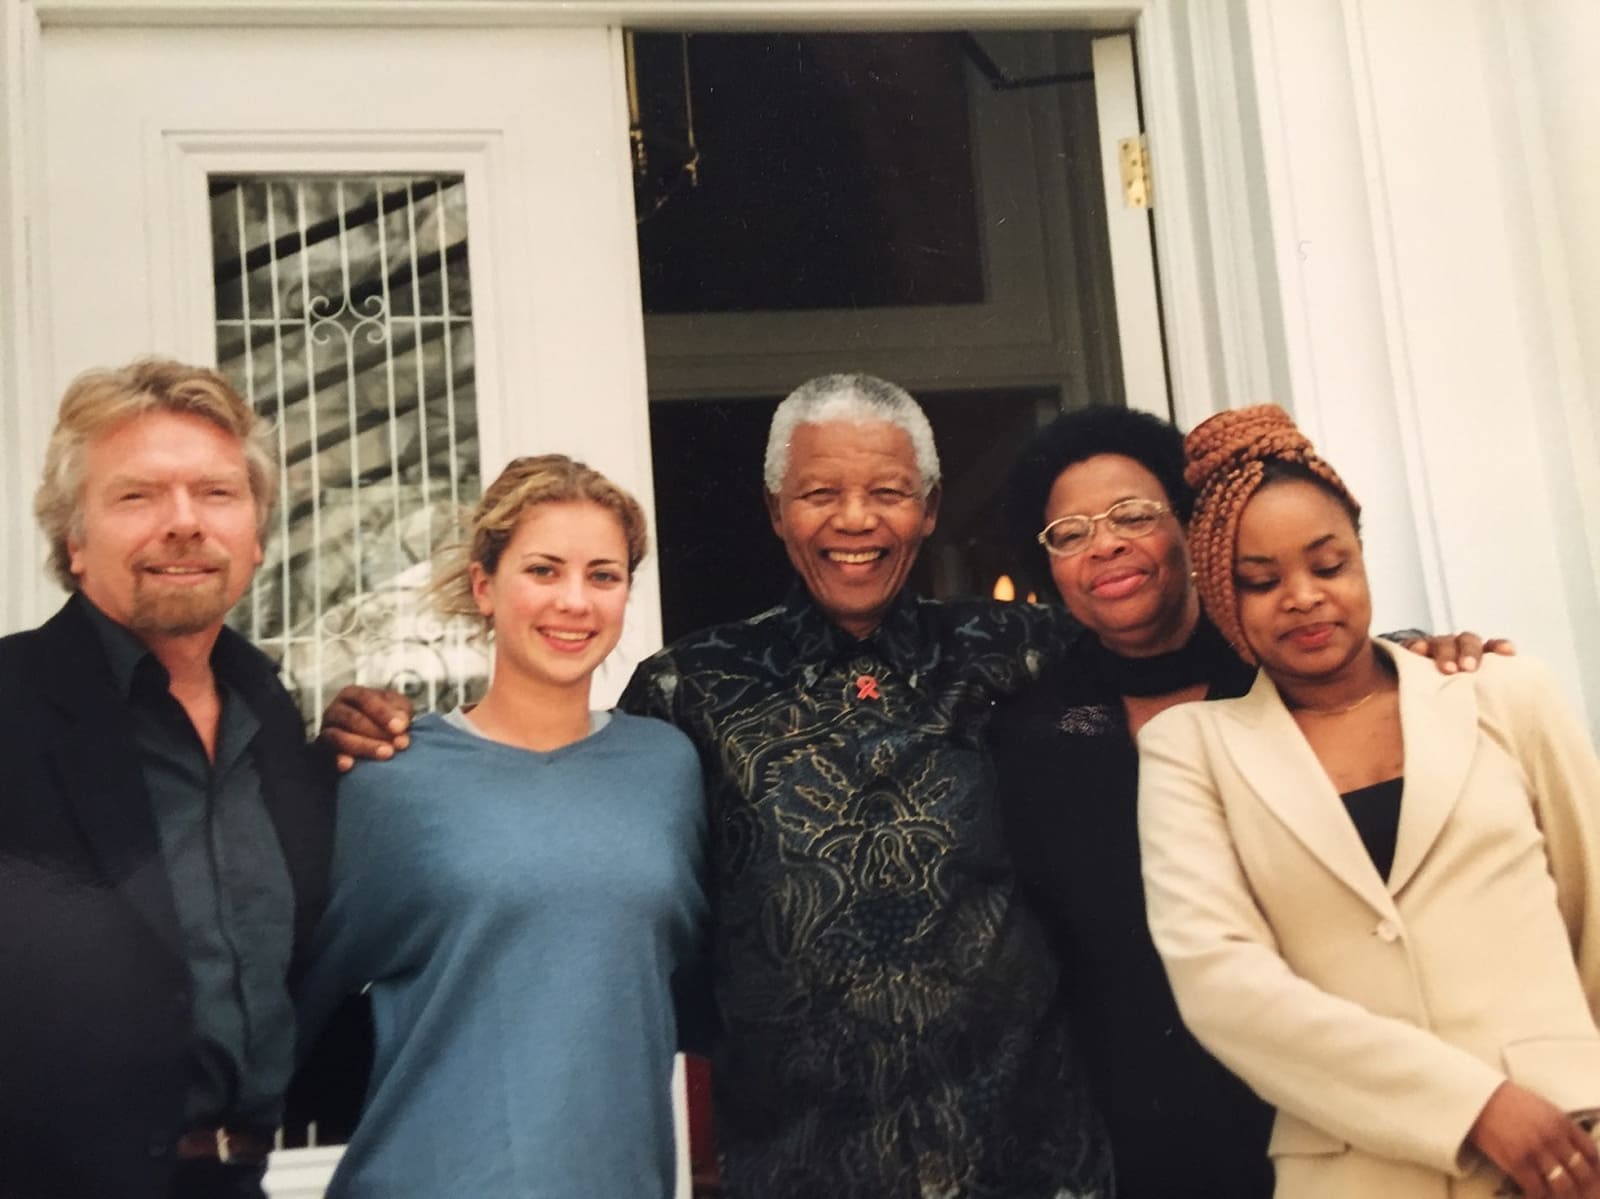 Richard and Holly Branson stand with Nelson Mandela.  They are smiling with their arms around each other's shoulders